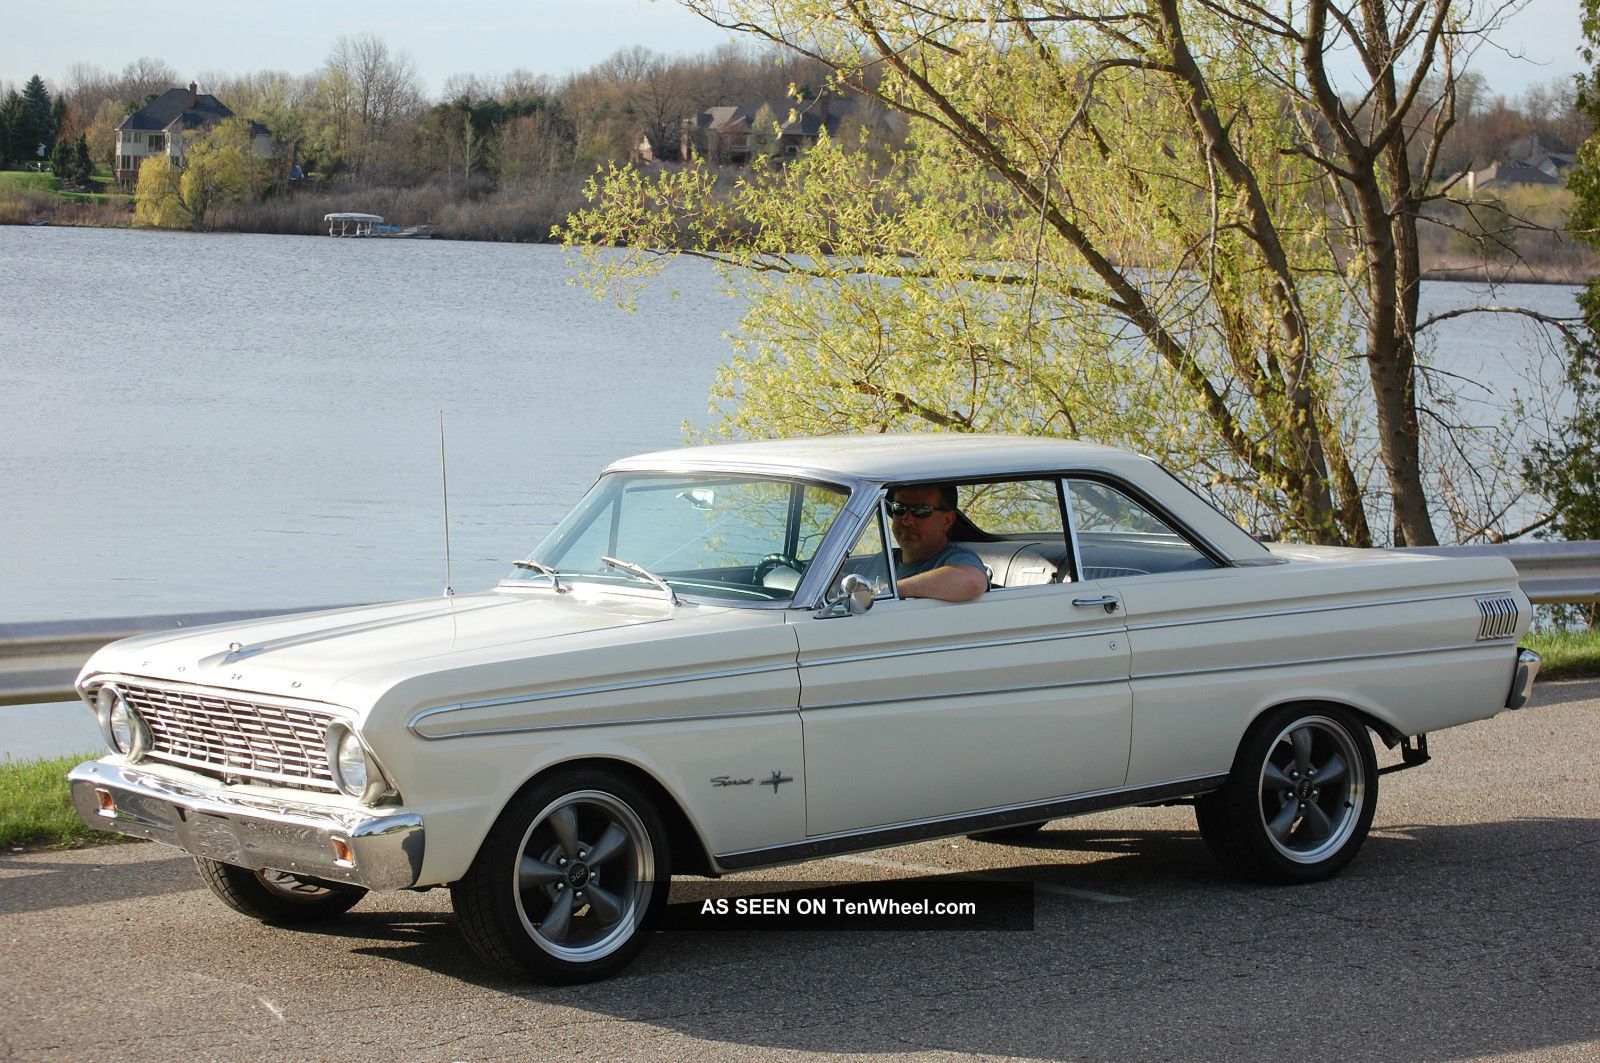 1964 Ford falcon sprint specifications #9